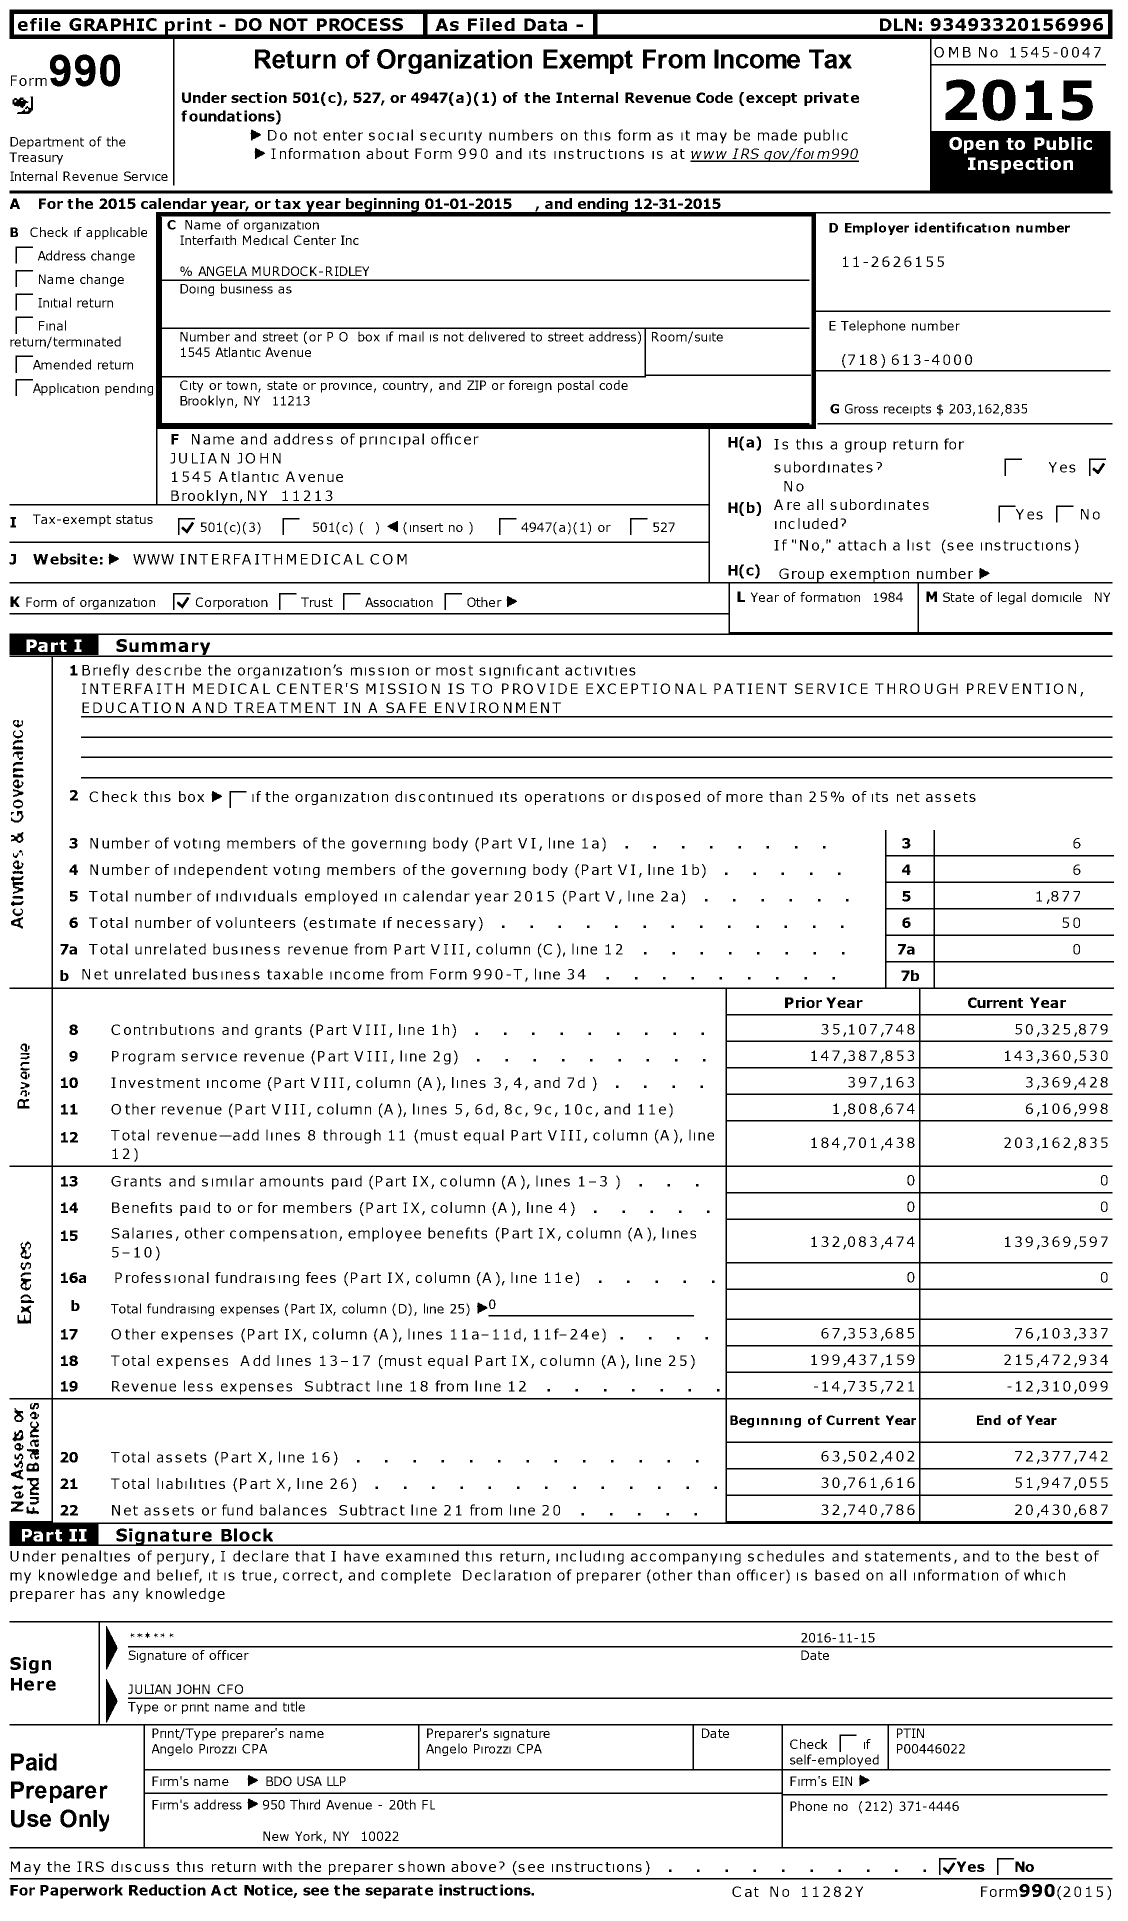 Image of first page of 2015 Form 990 for Interfaith Medical Center (IMC)